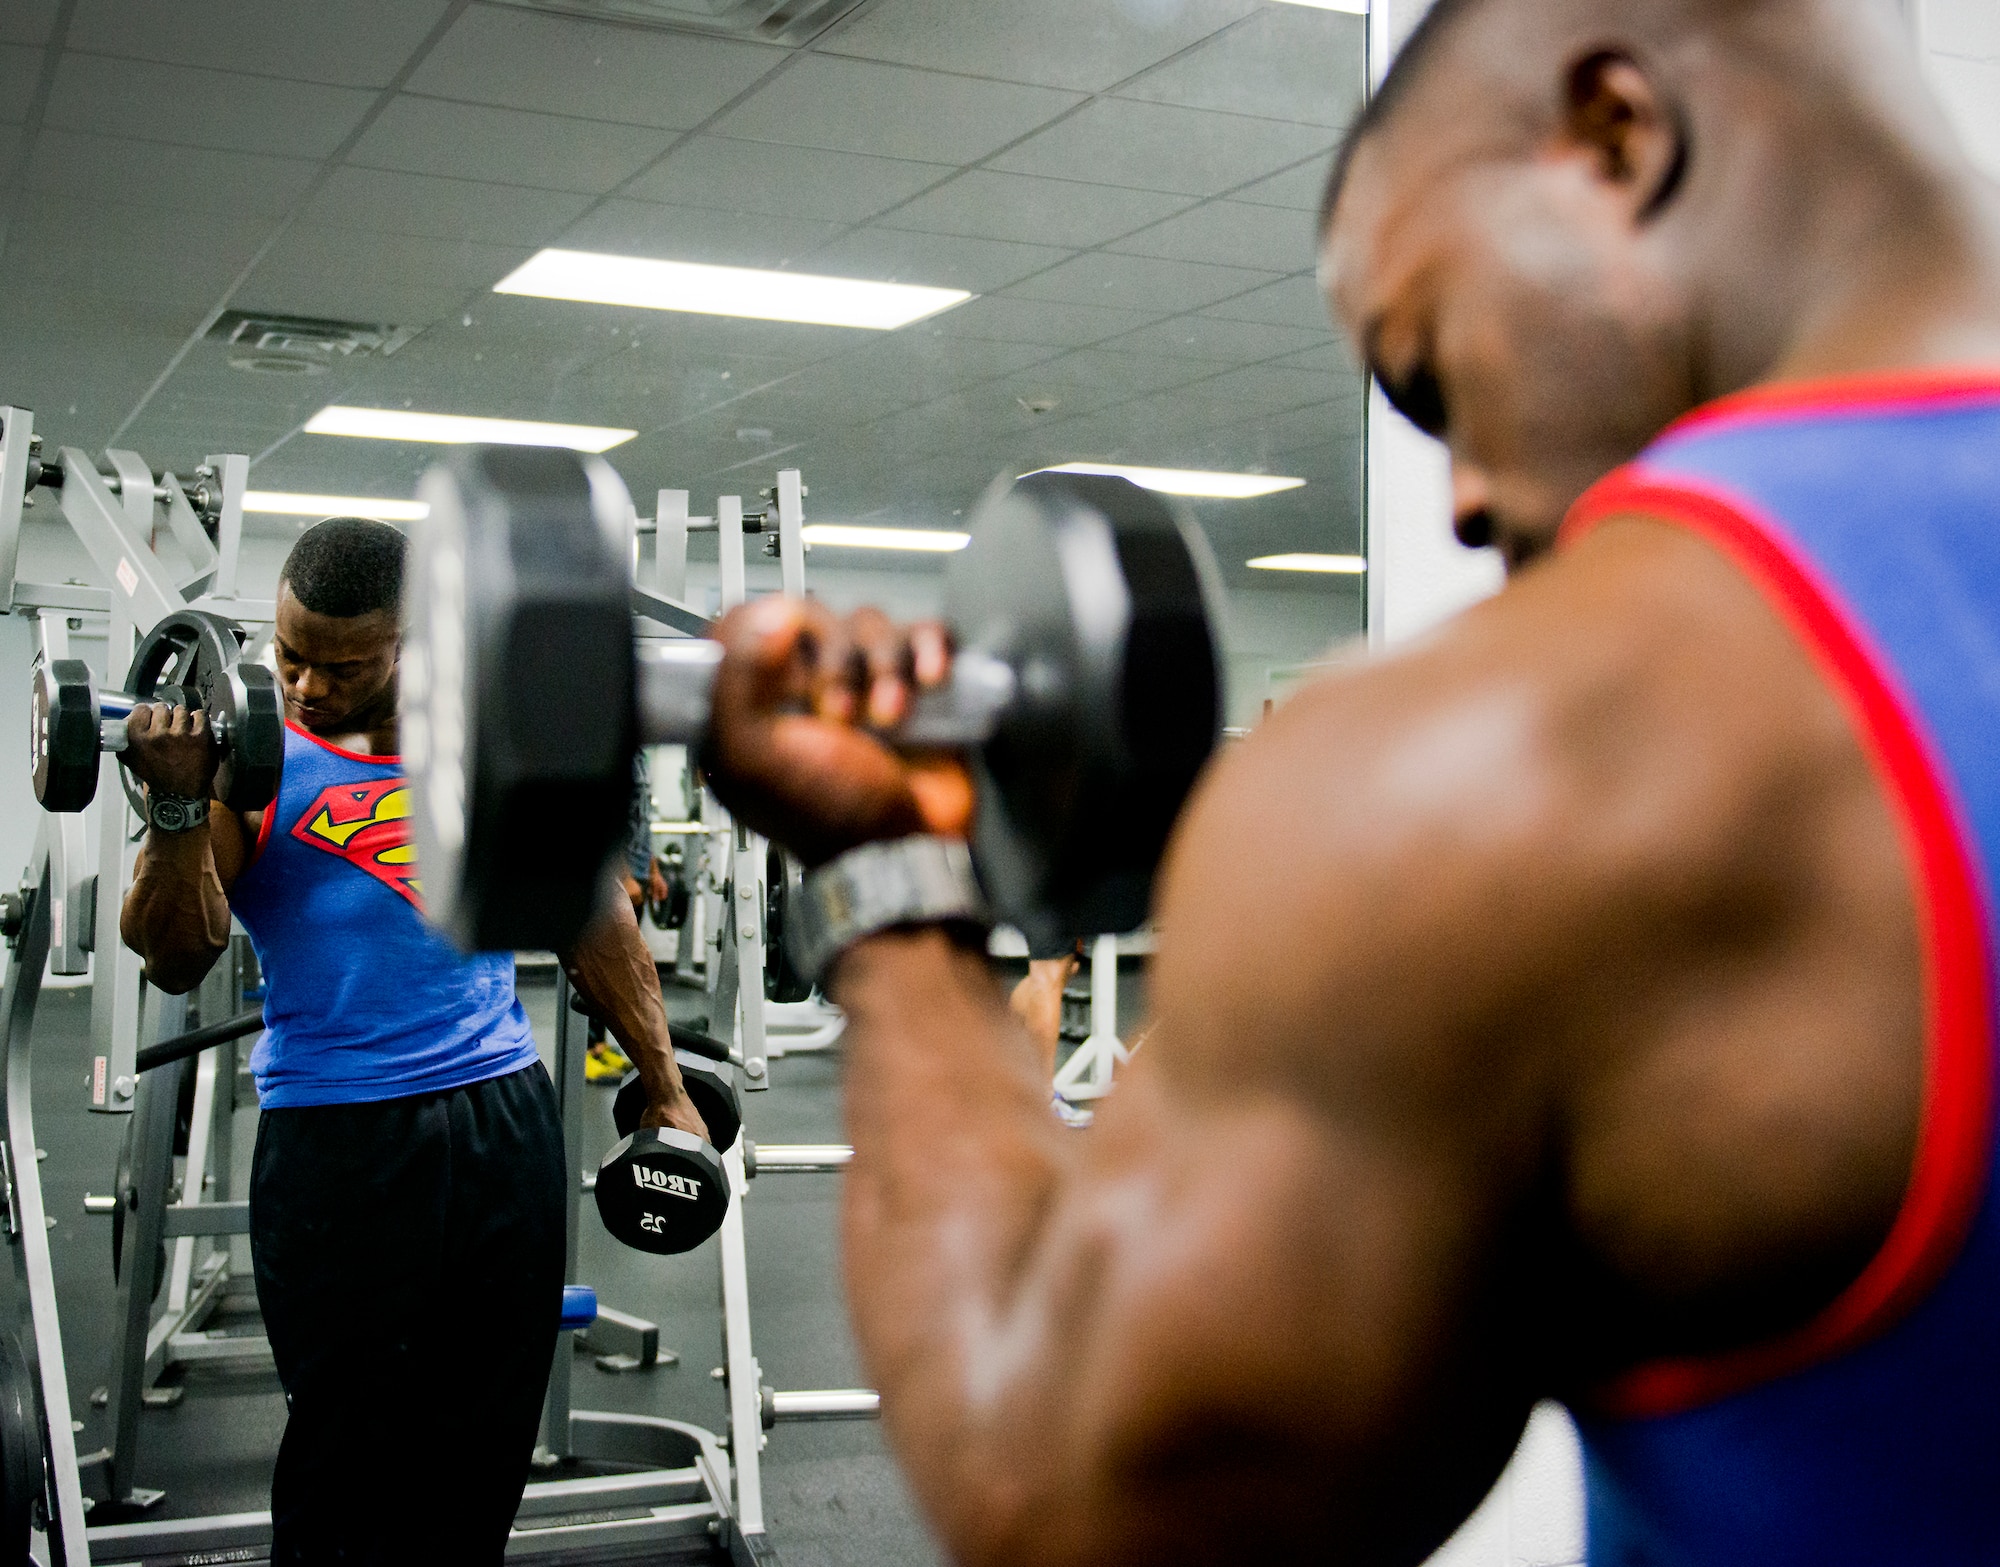 Senior Airman Terrence Ruffin, 16th Electronic Warfare Squadron, lifts 25-pound dumbbells at the fitness center on Eglin Air Force Base, Fla.  In November, the Airman became the youngest professional bodybuilder on the circuit at age 21.  (U.S. Air Force photo/Samuel King Jr.) 